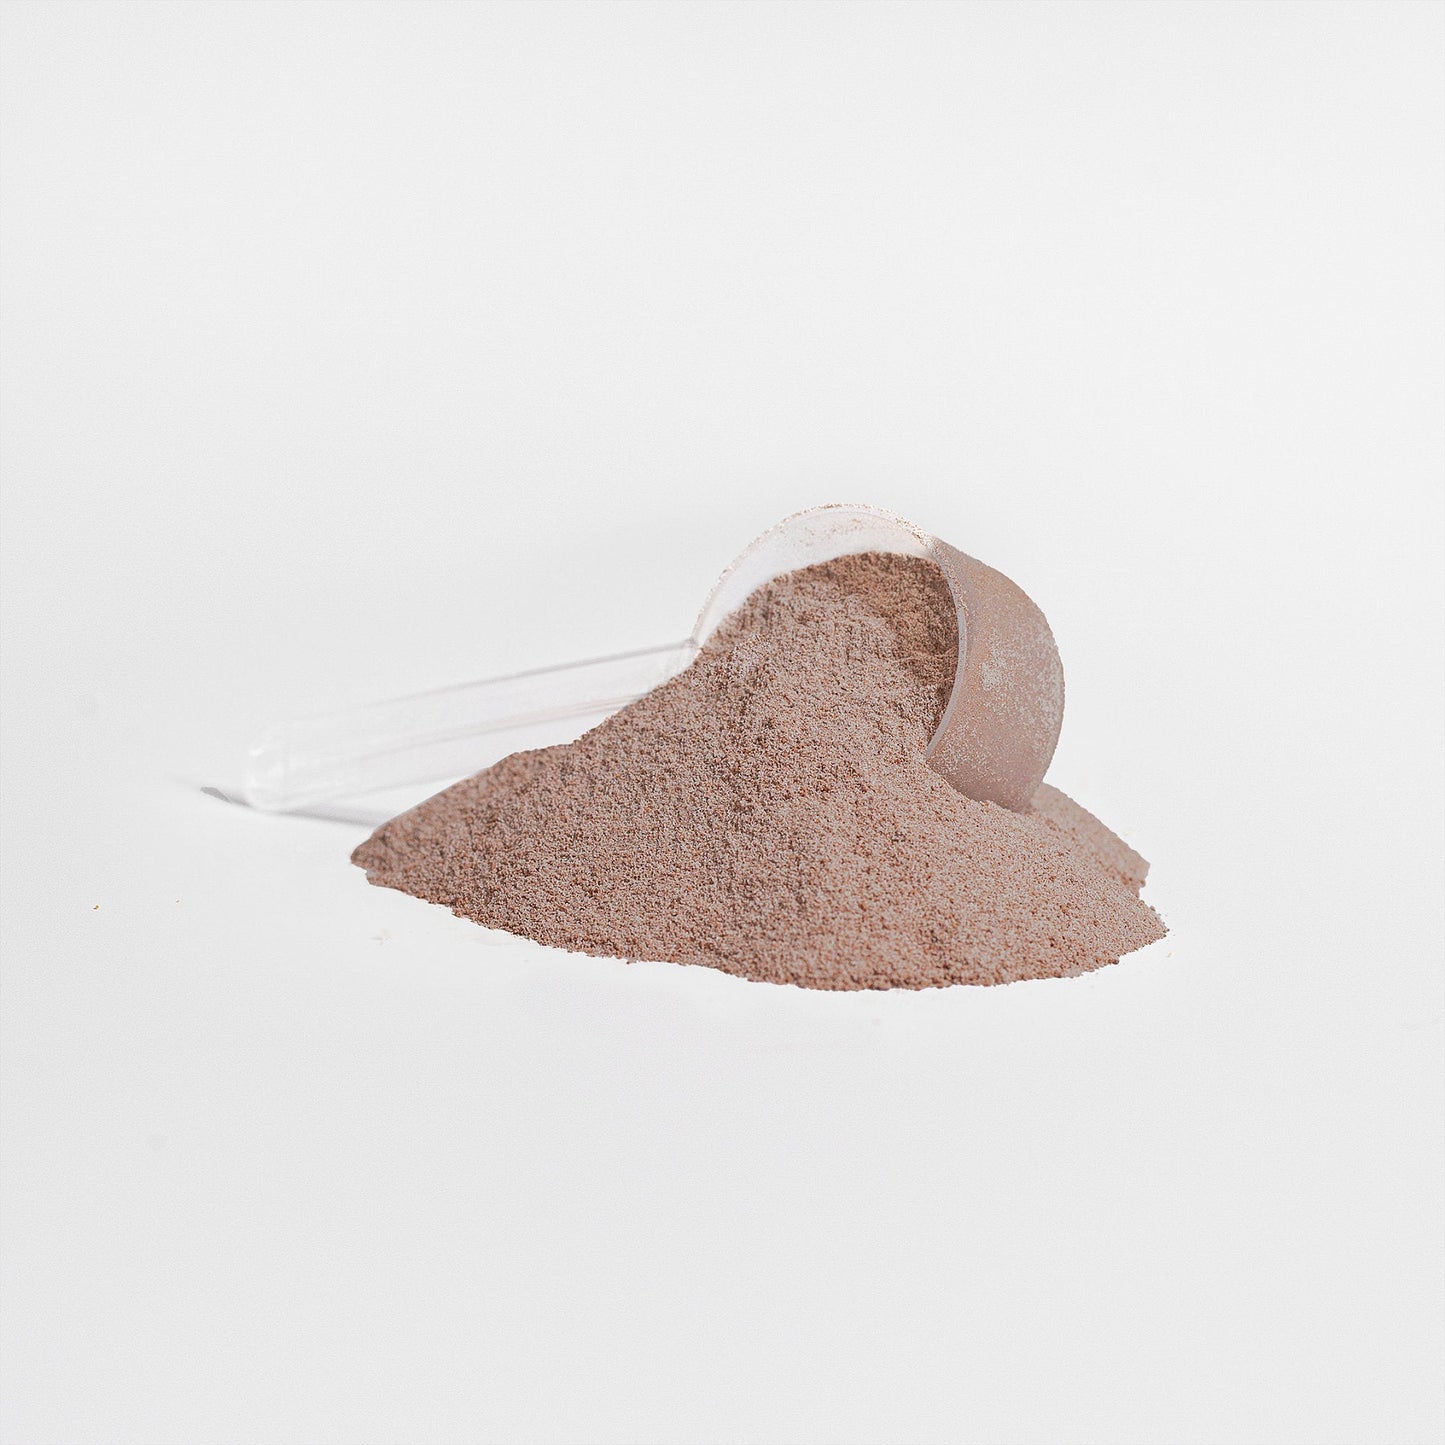 Whey Protein (Chocolate Flavour) - Vitclear.